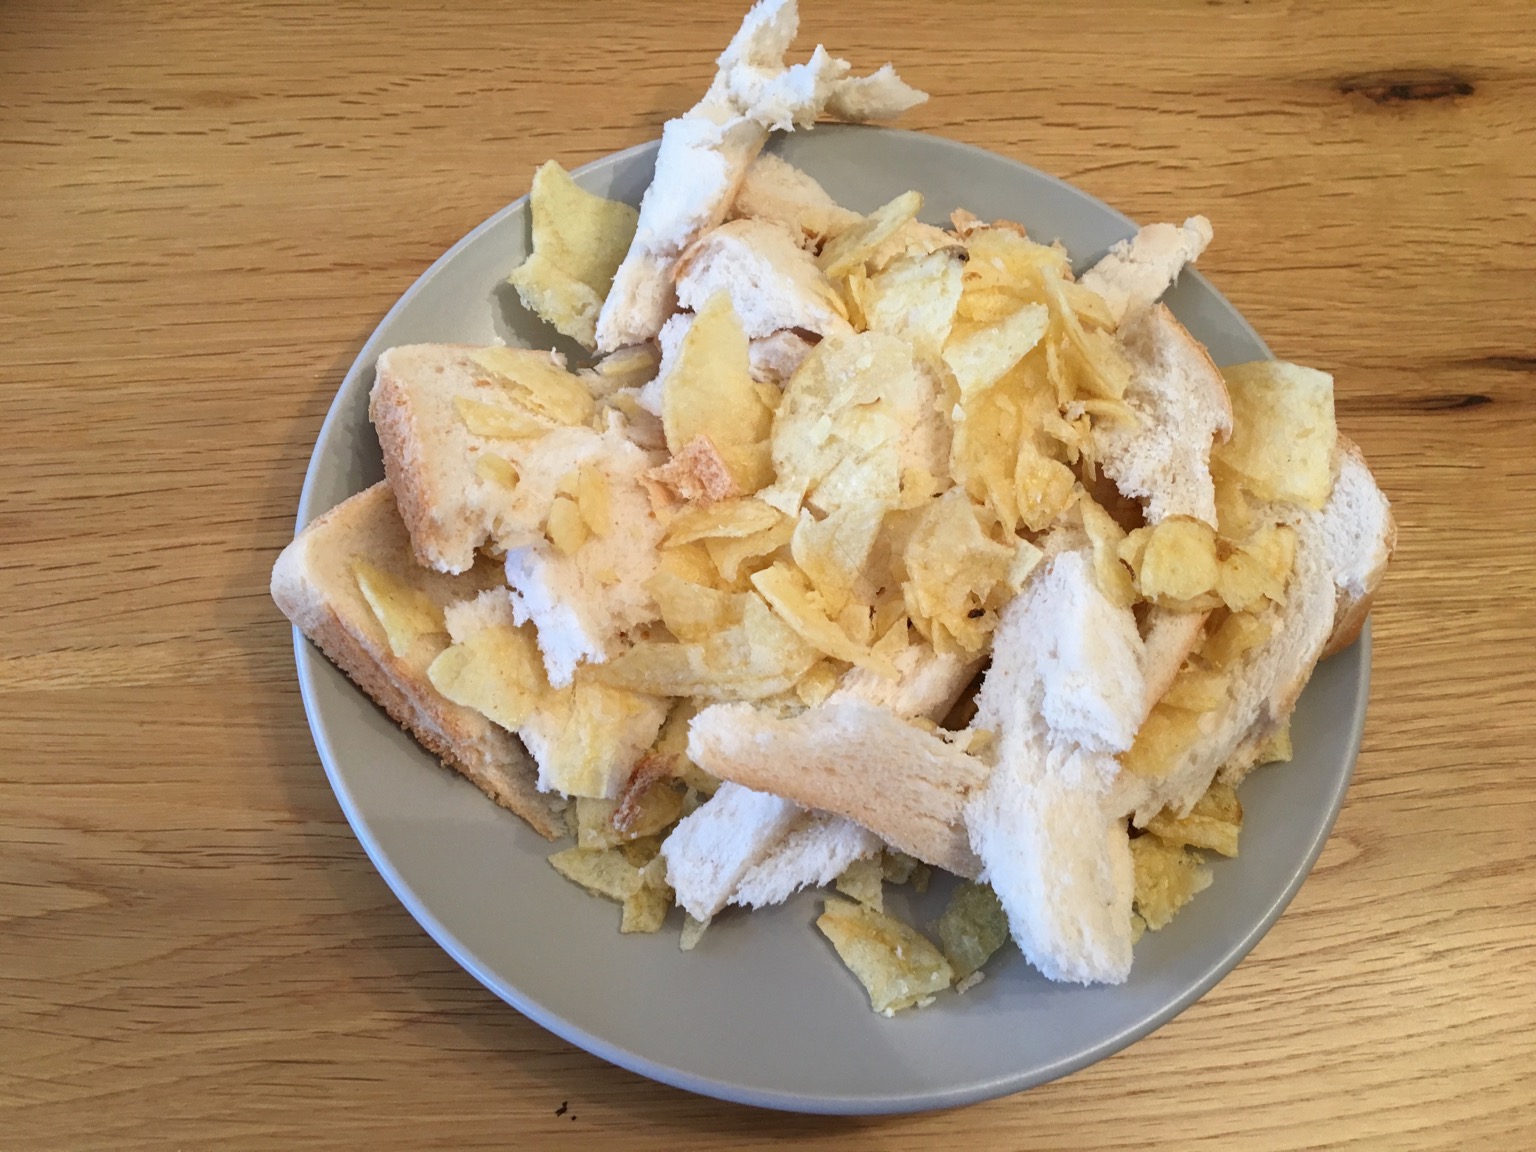 Chaotic pile of bread and crisps